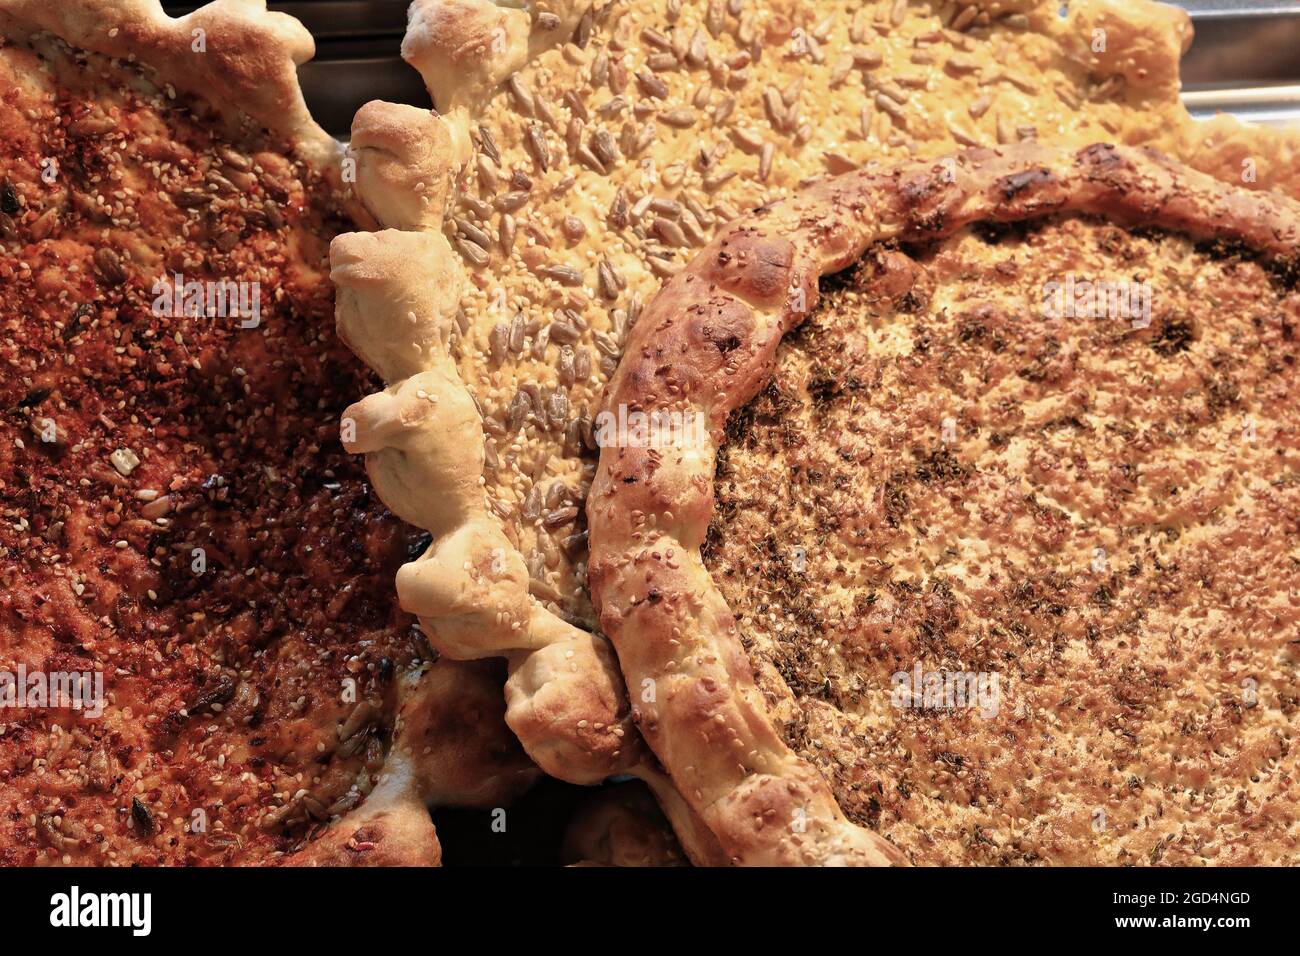 Pieces of nang-naan bread: oven baked-unleavened-flatbread-nuts inlaid on it. Xi'an-China-1541 Stock Photo